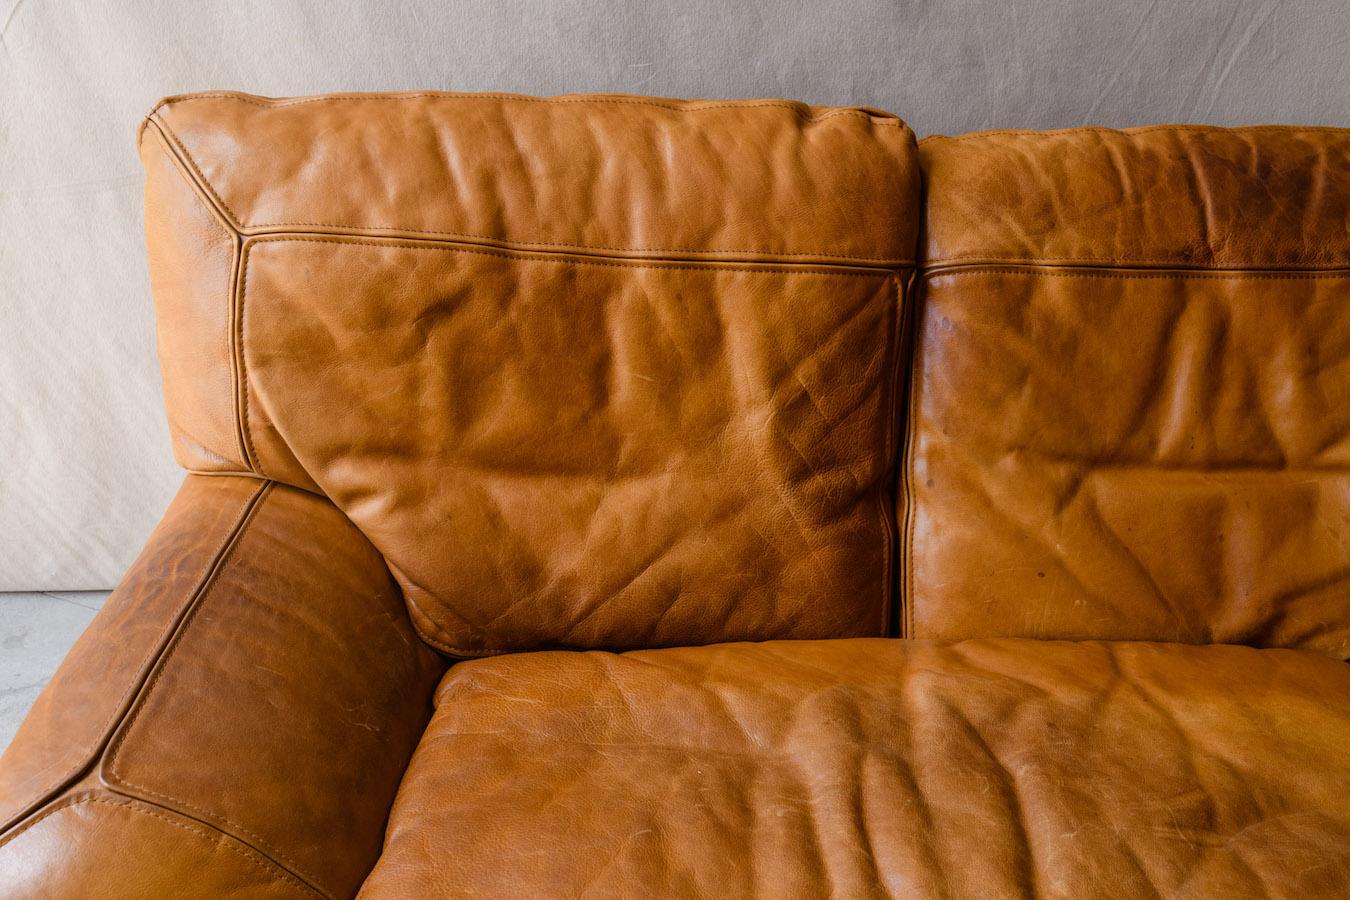 European Vintage Pair of Leather Roche Bobois Sofas, from France, Circa 1970